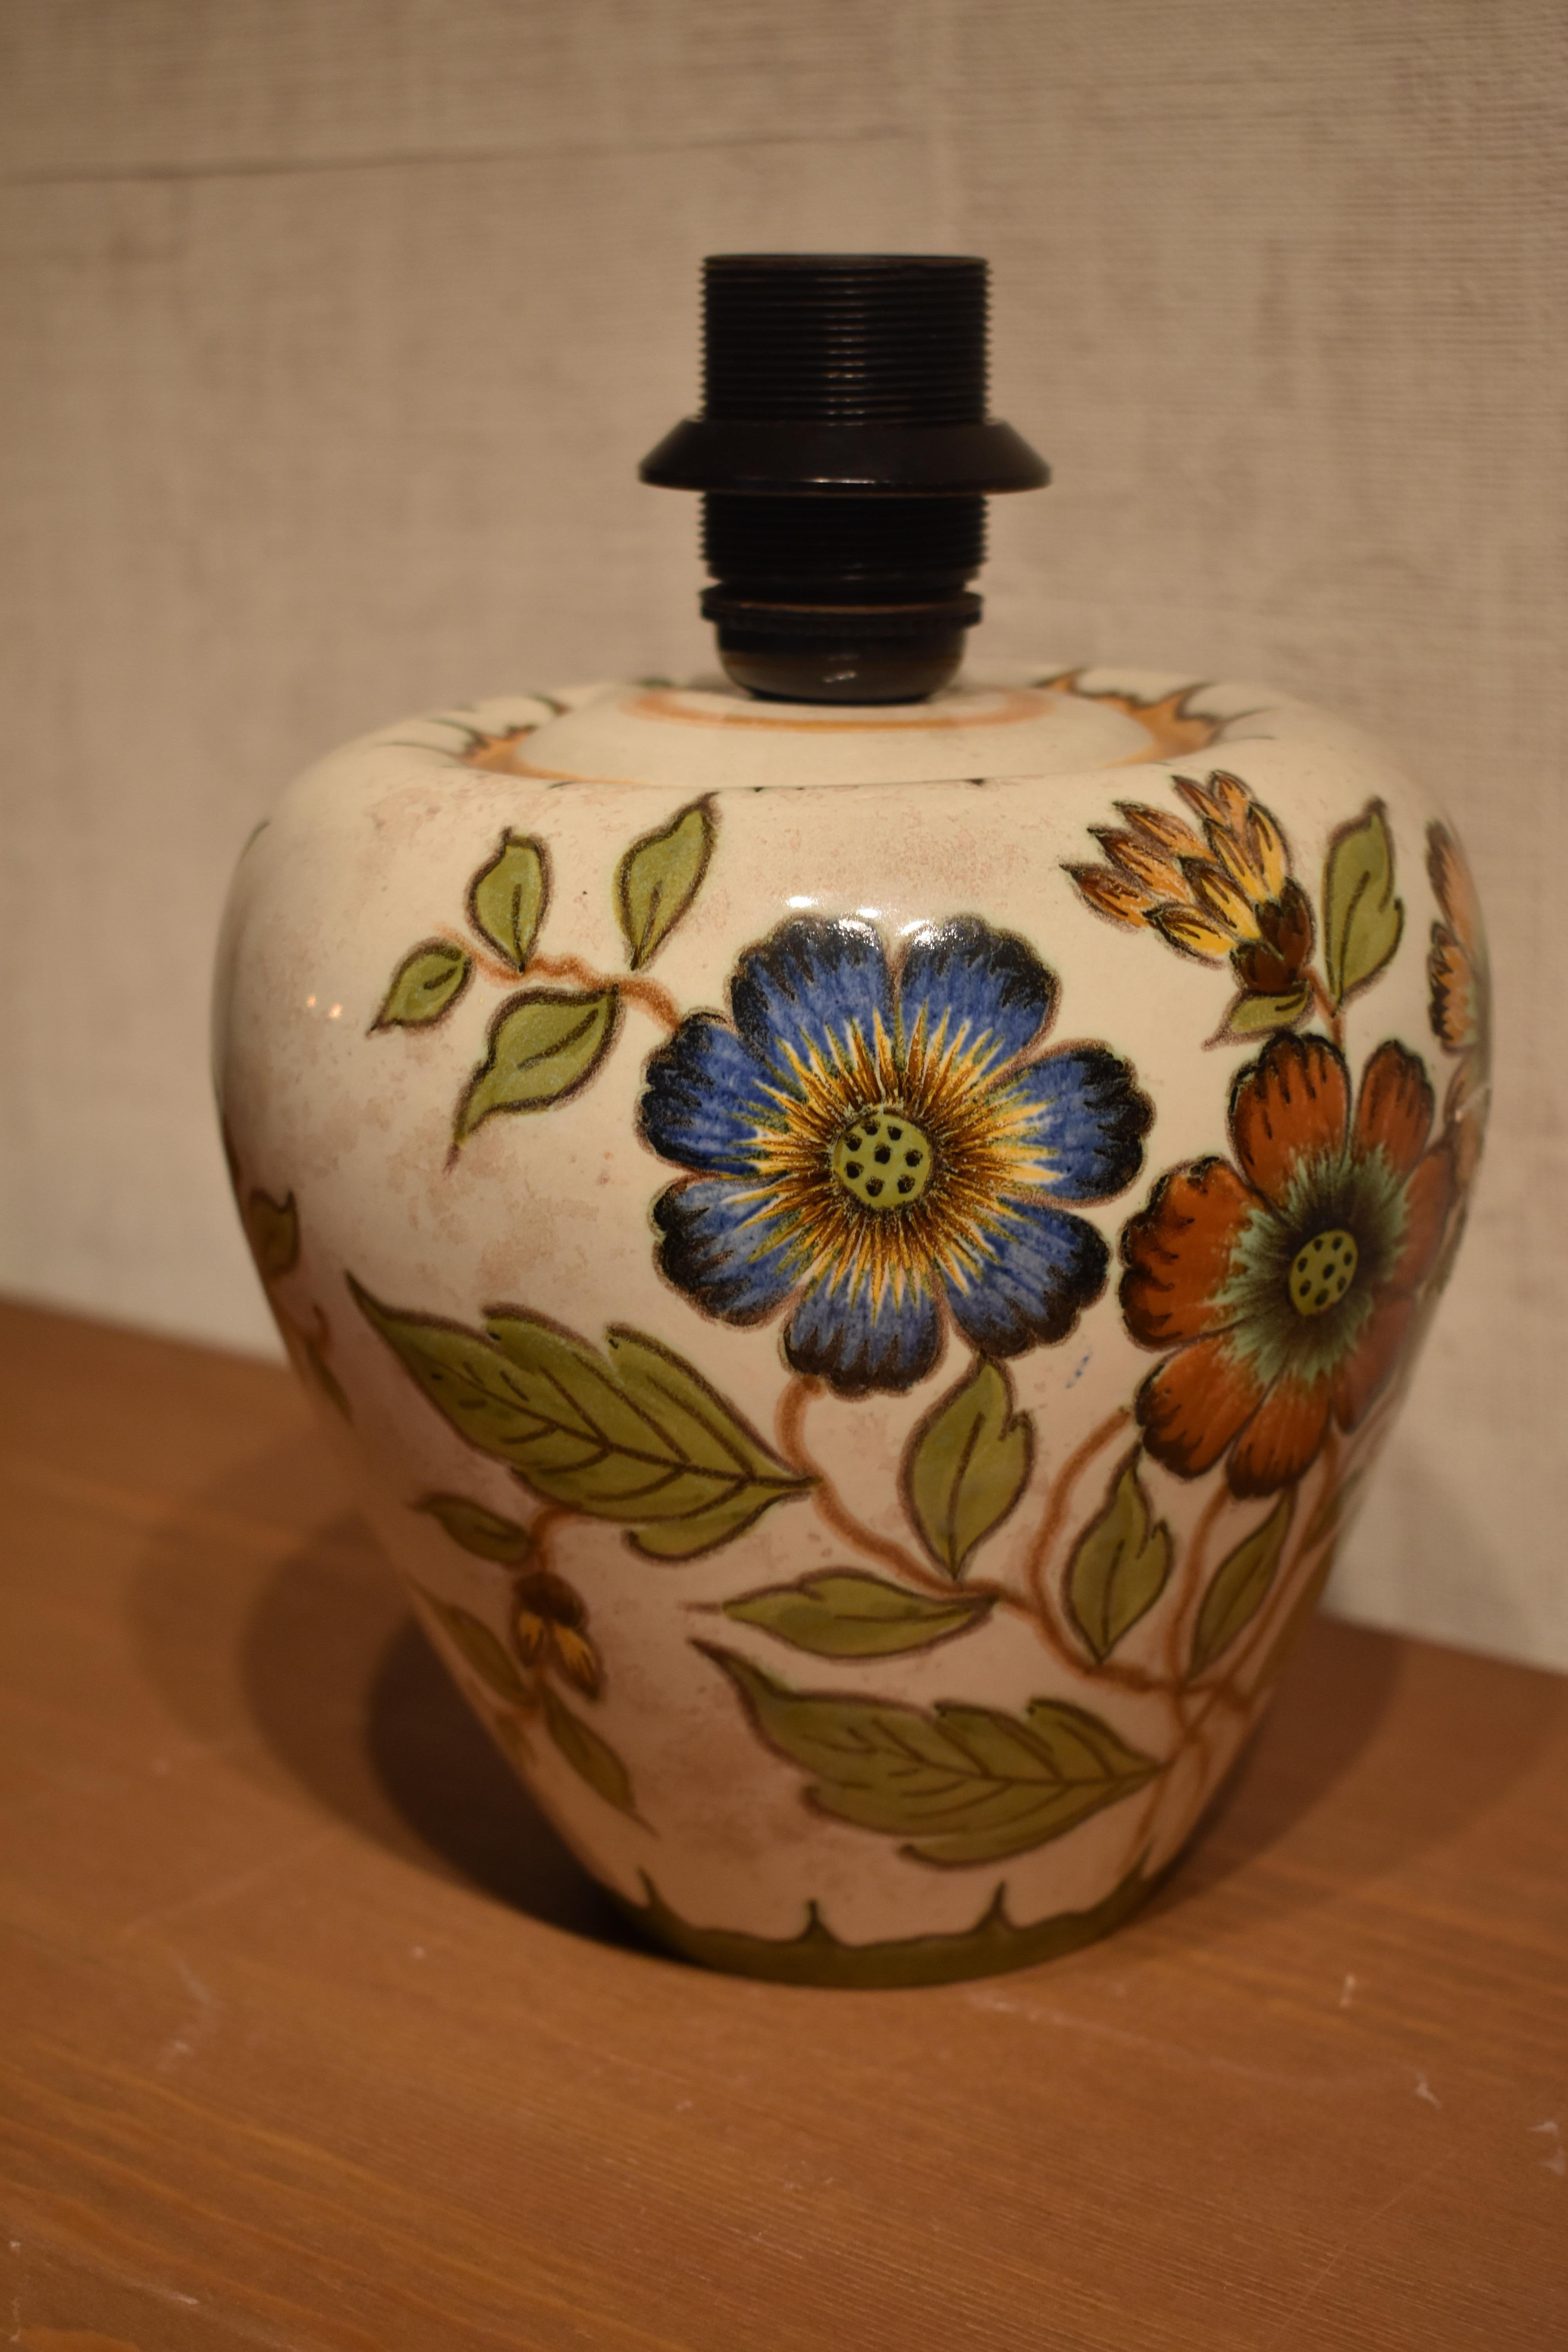 This lovely ceramic table lamp is created by Gouda Holland in a typical Dutch style. It features a beautiful decor of flowers, which are somewhat reminiscent to Van Gogh's flower paintings.